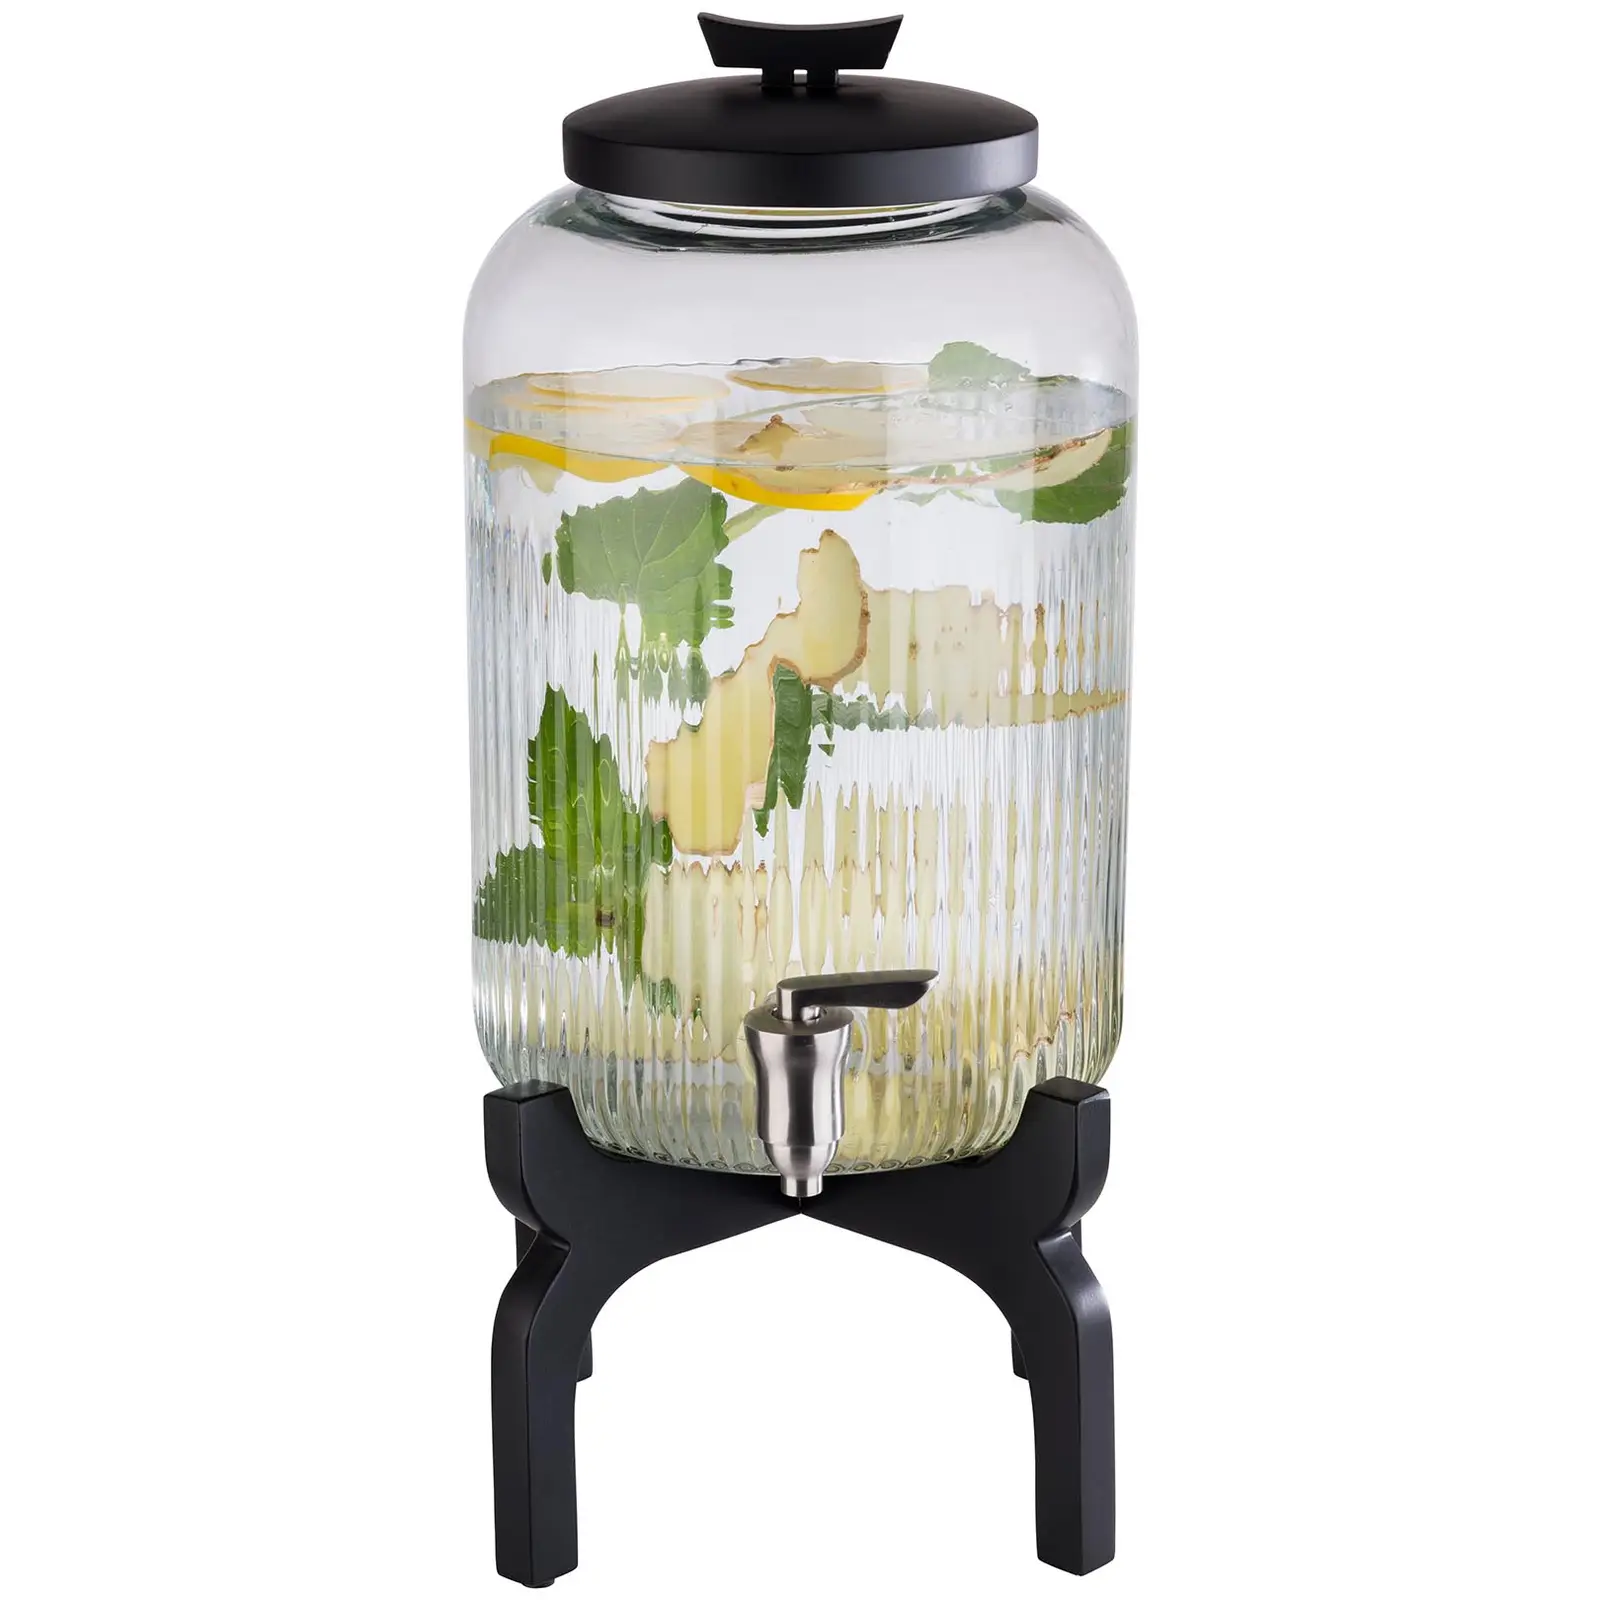 Juice Dispenser - 7 L - Glass, stainless steel, silicone, wood